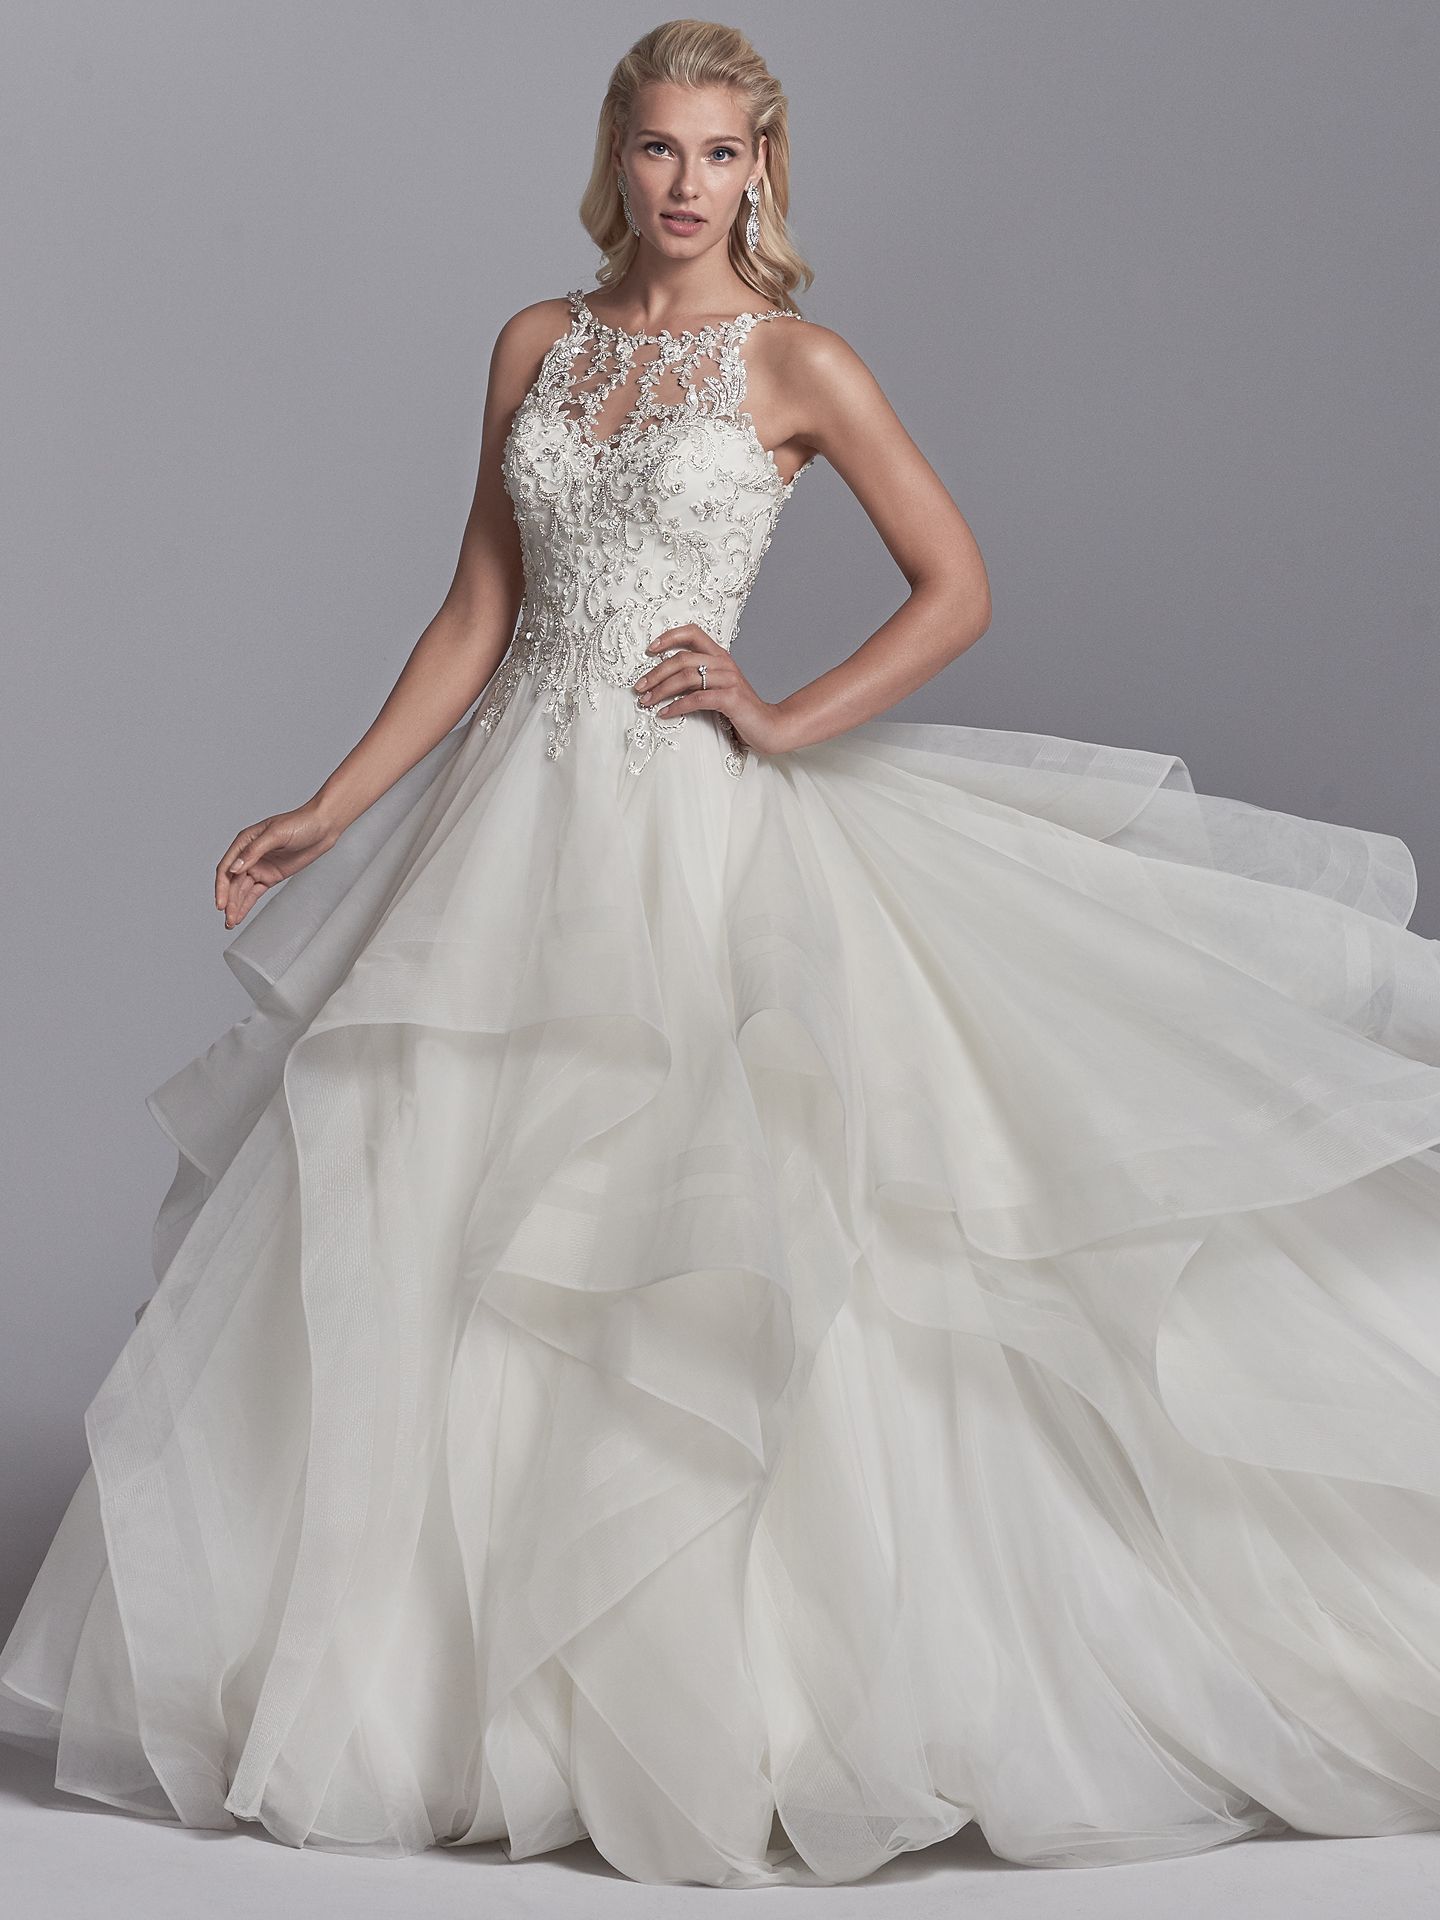 Murphy wedding dress by Sottero and Midgley. Modern Royalty: Wedding Dresses Inspired by the Royal Engagement